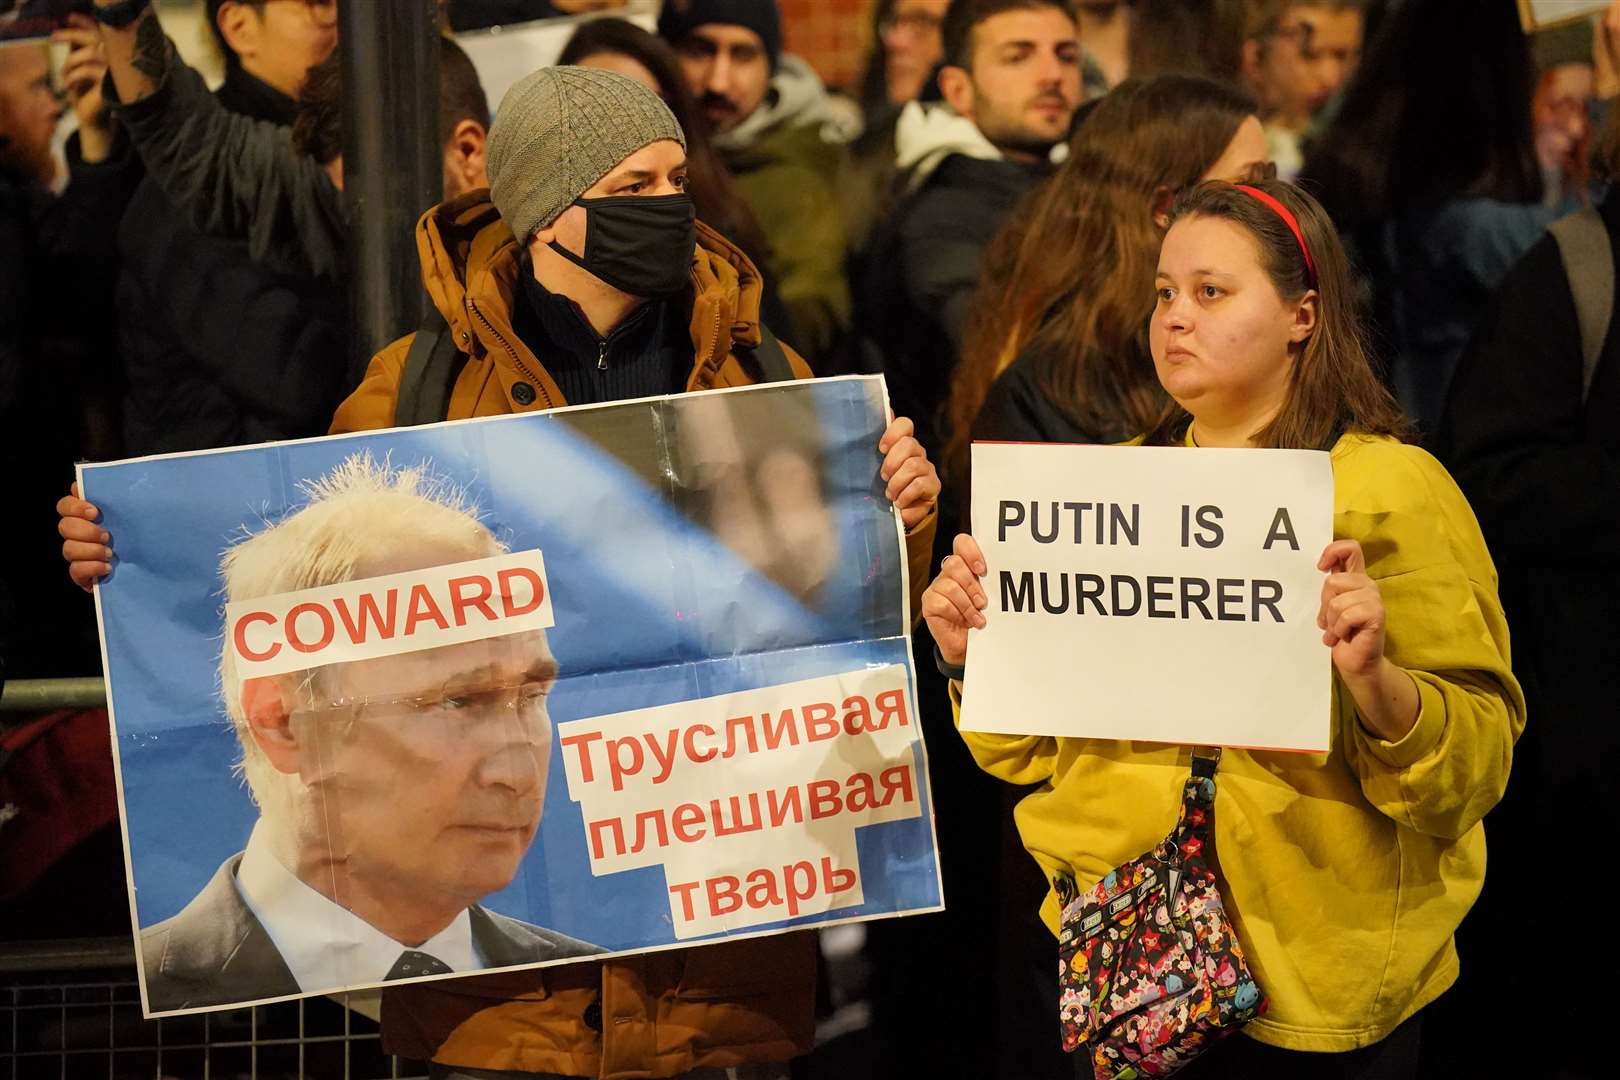 People take part in a protest opposite the Russian Embassy in London (Jonathan Brady/PA)